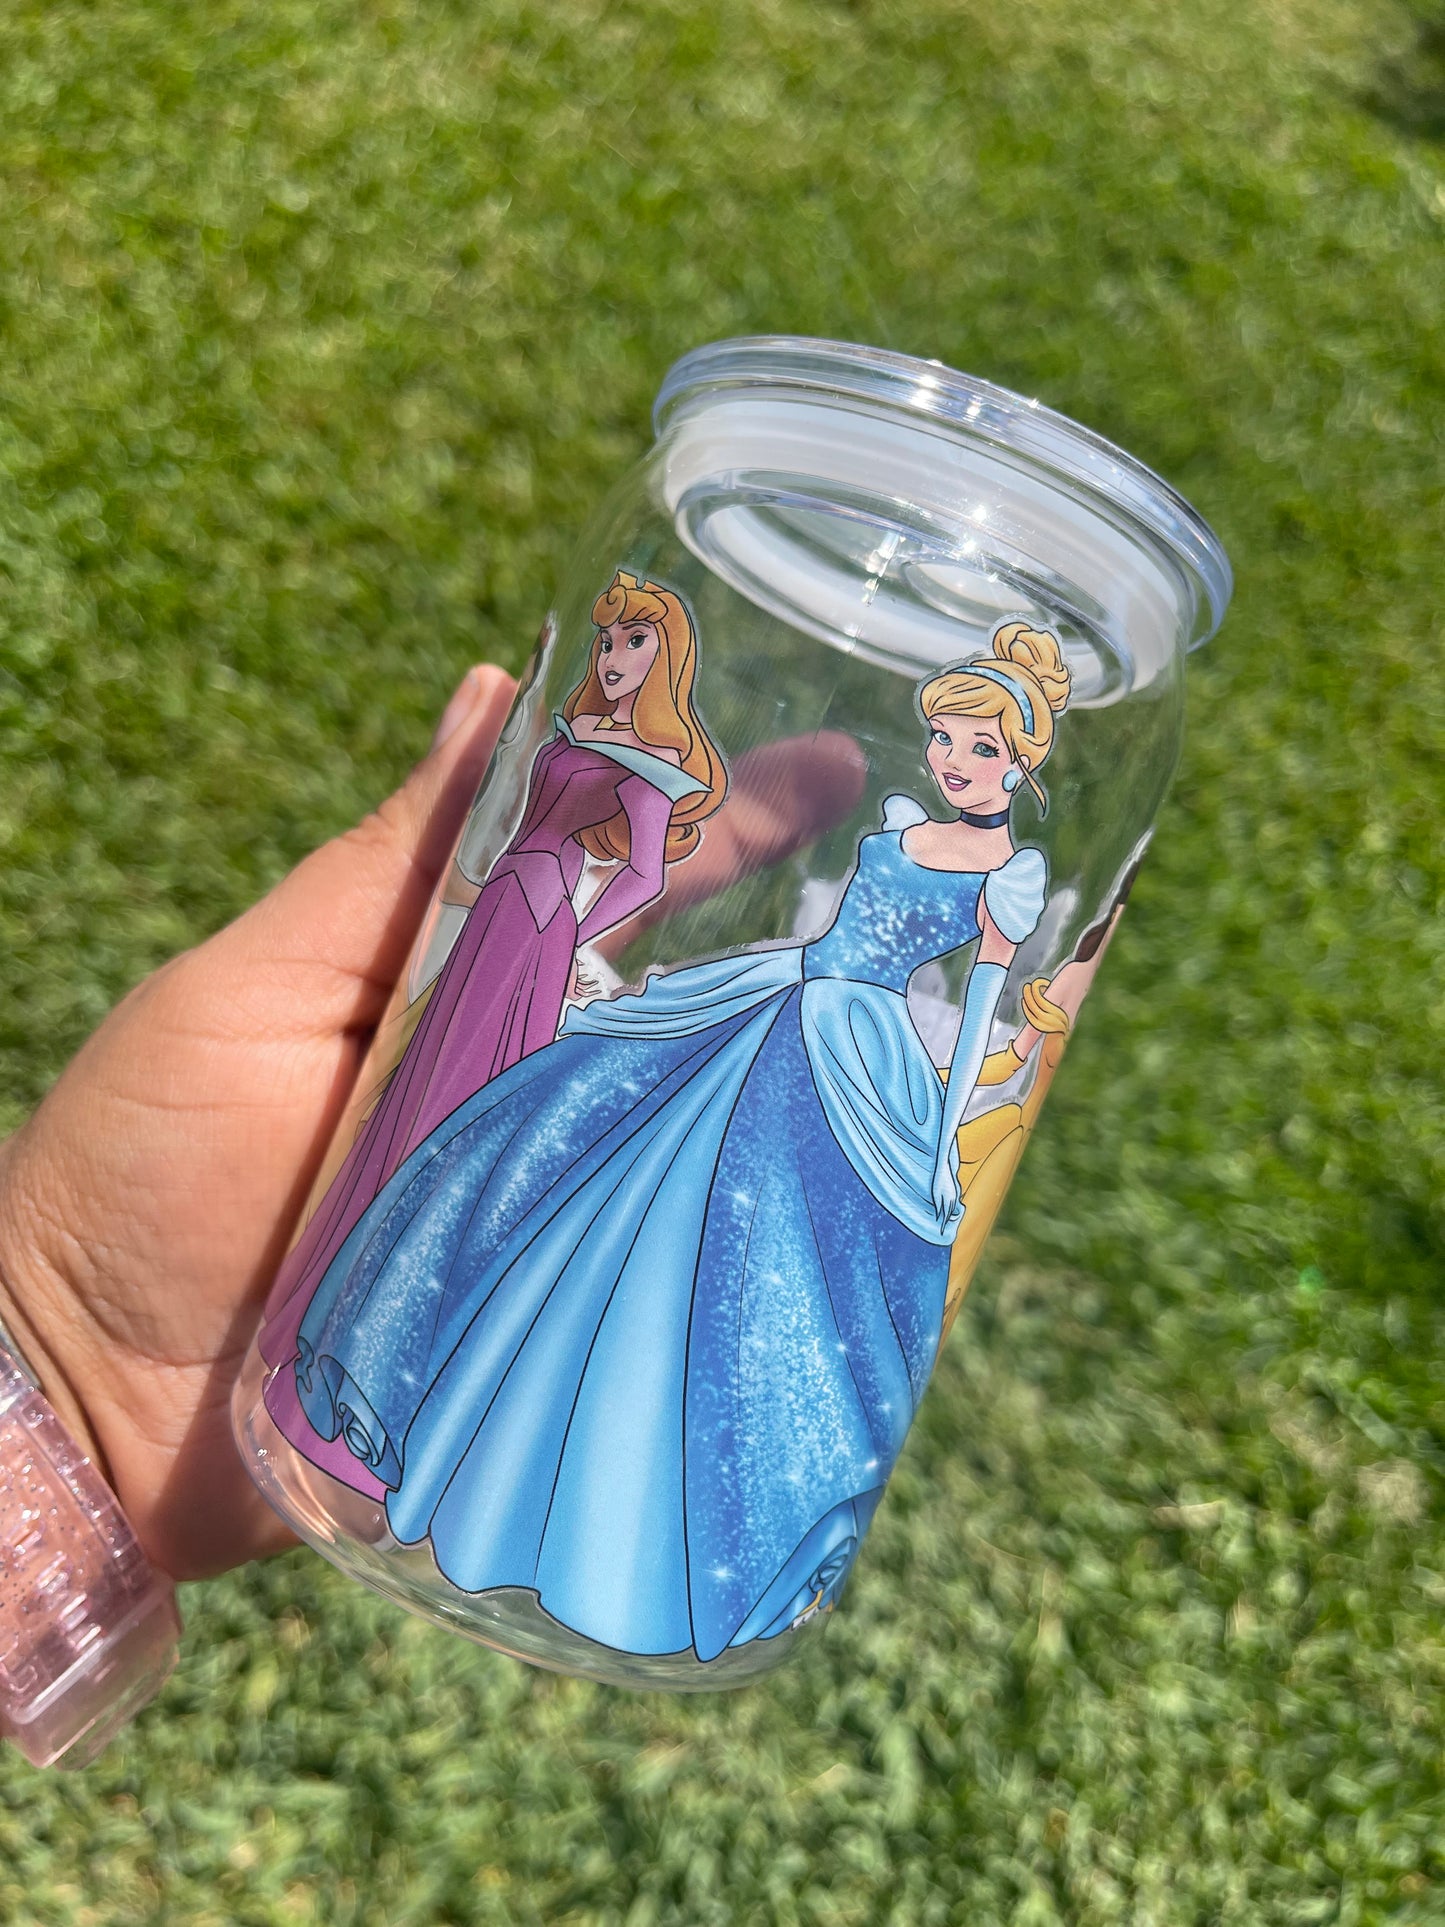 Character Plastic Can Cups